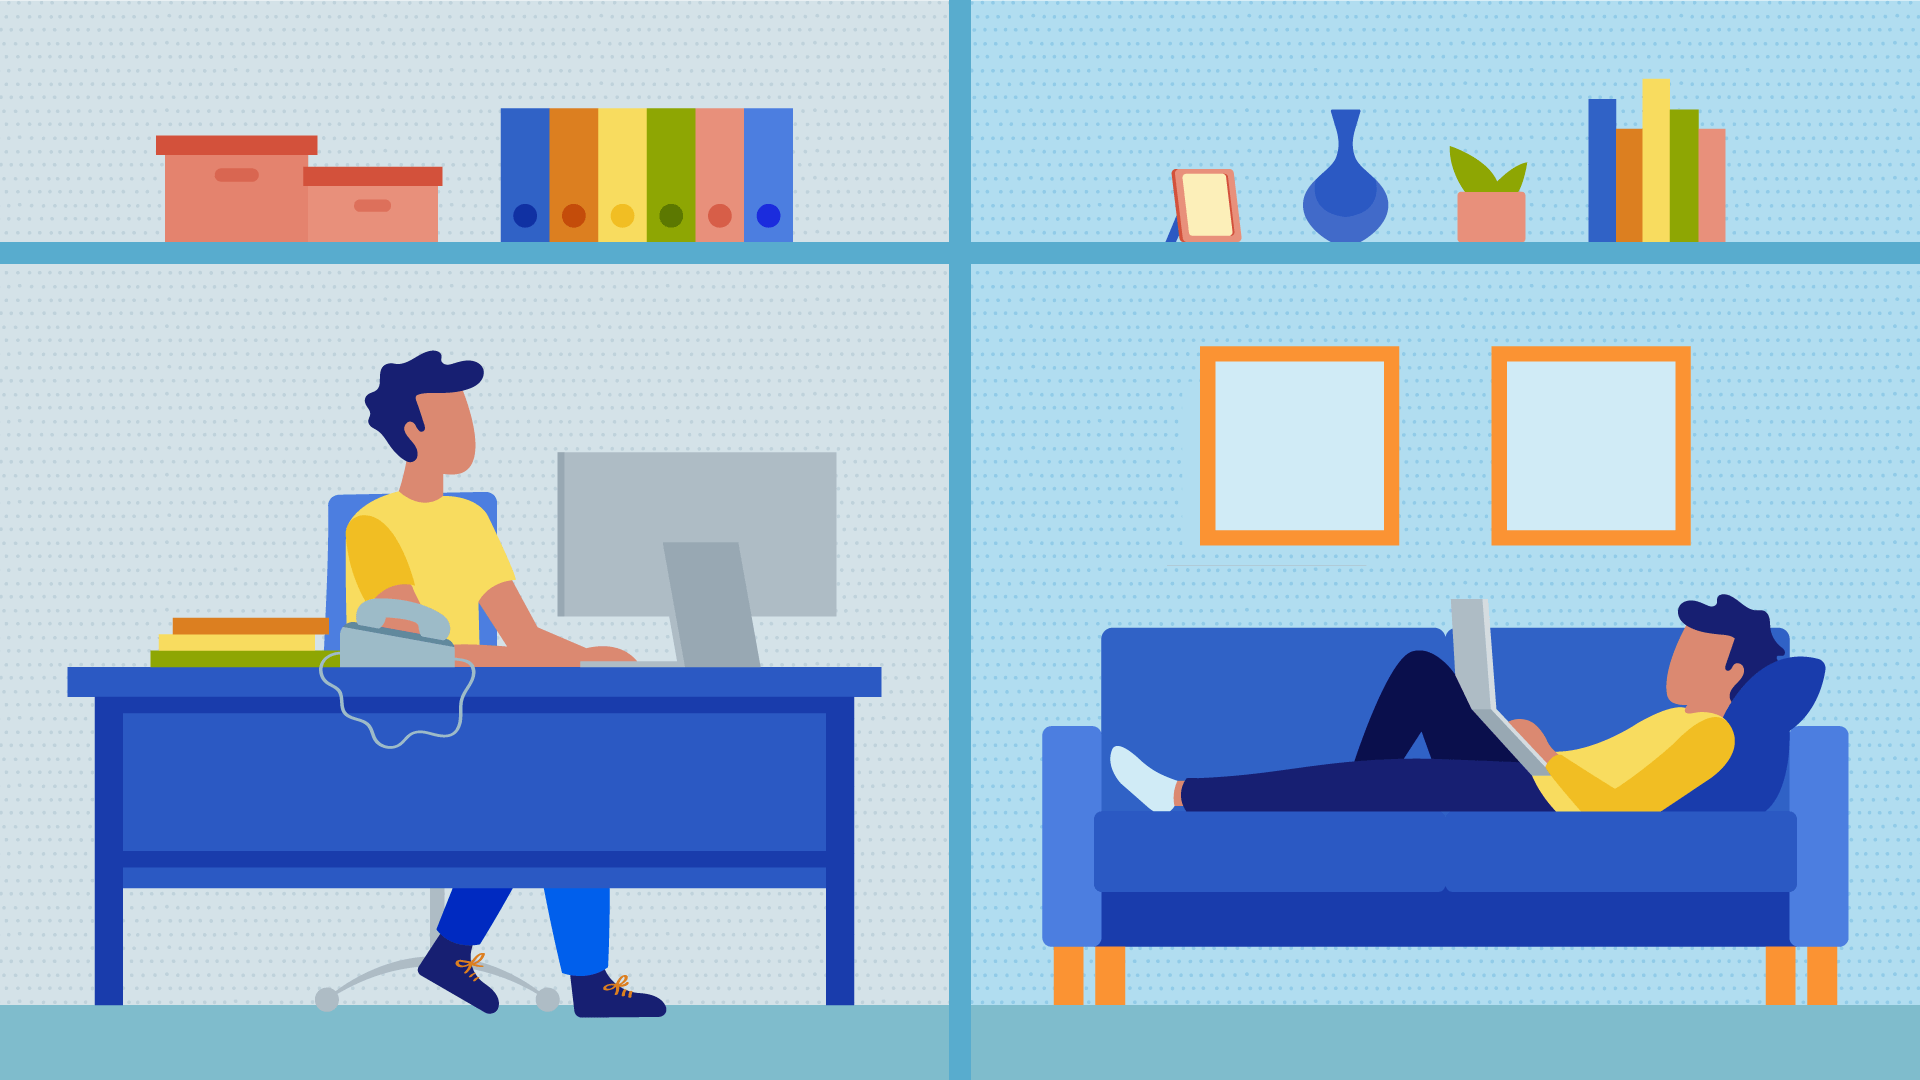 https://www.nextiva.com/blog/wp-content/uploads/sites/2/2020/04/working-from-home-vs-working-from-the-office-comparison-1.png